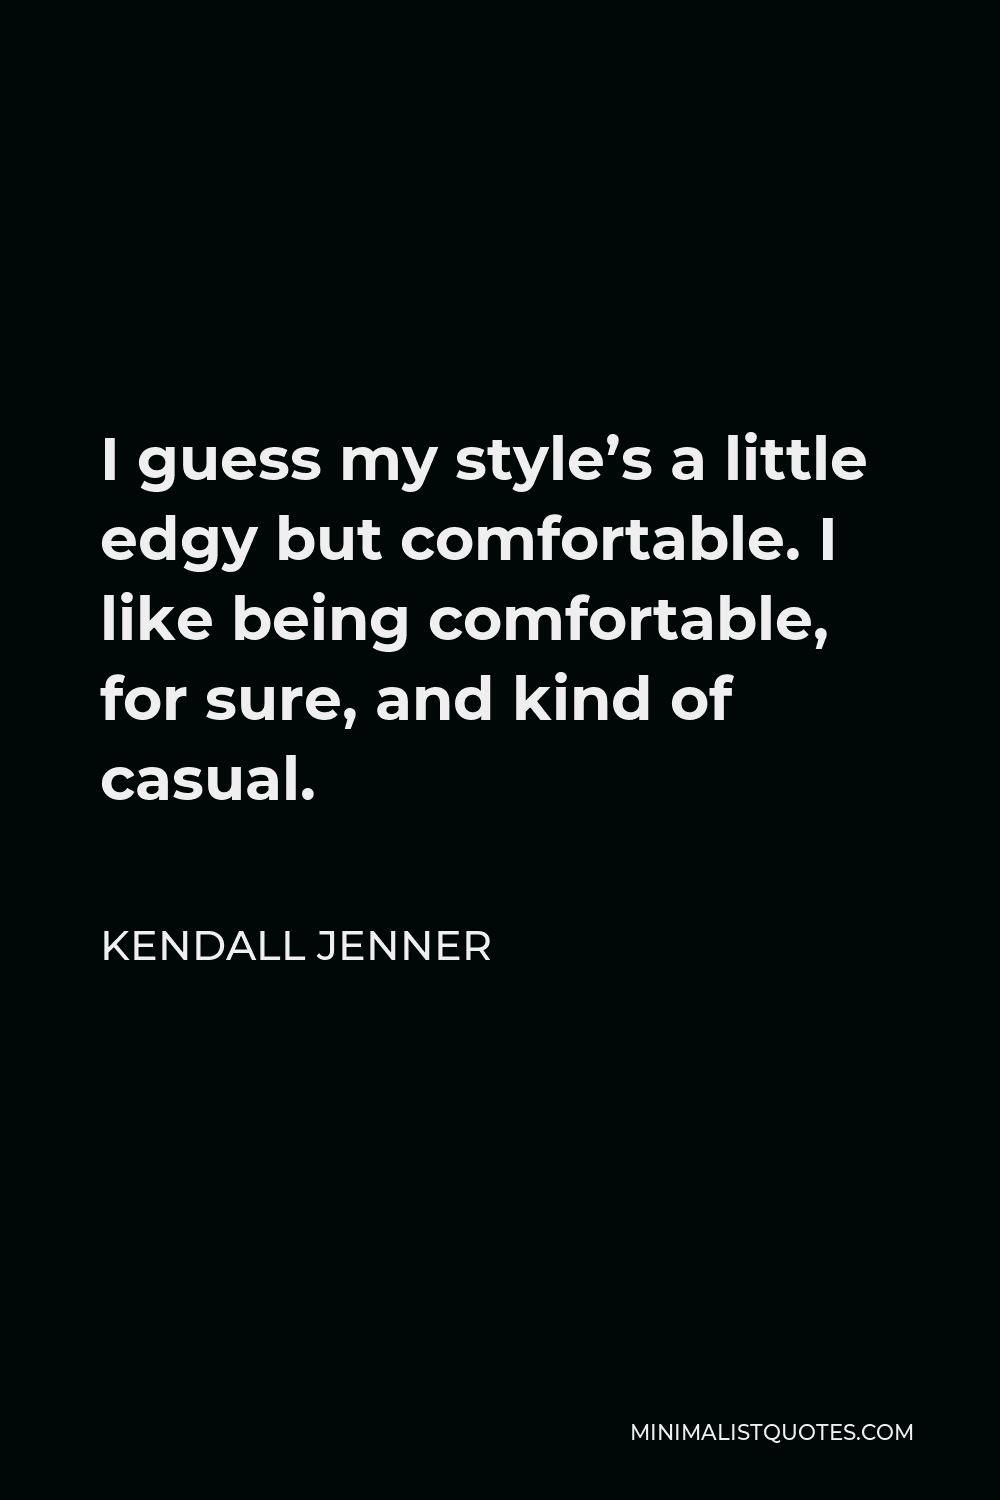 Kendall Jenner Quote - I guess my style’s a little edgy but comfortable. I like being comfortable, for sure, and kind of casual.